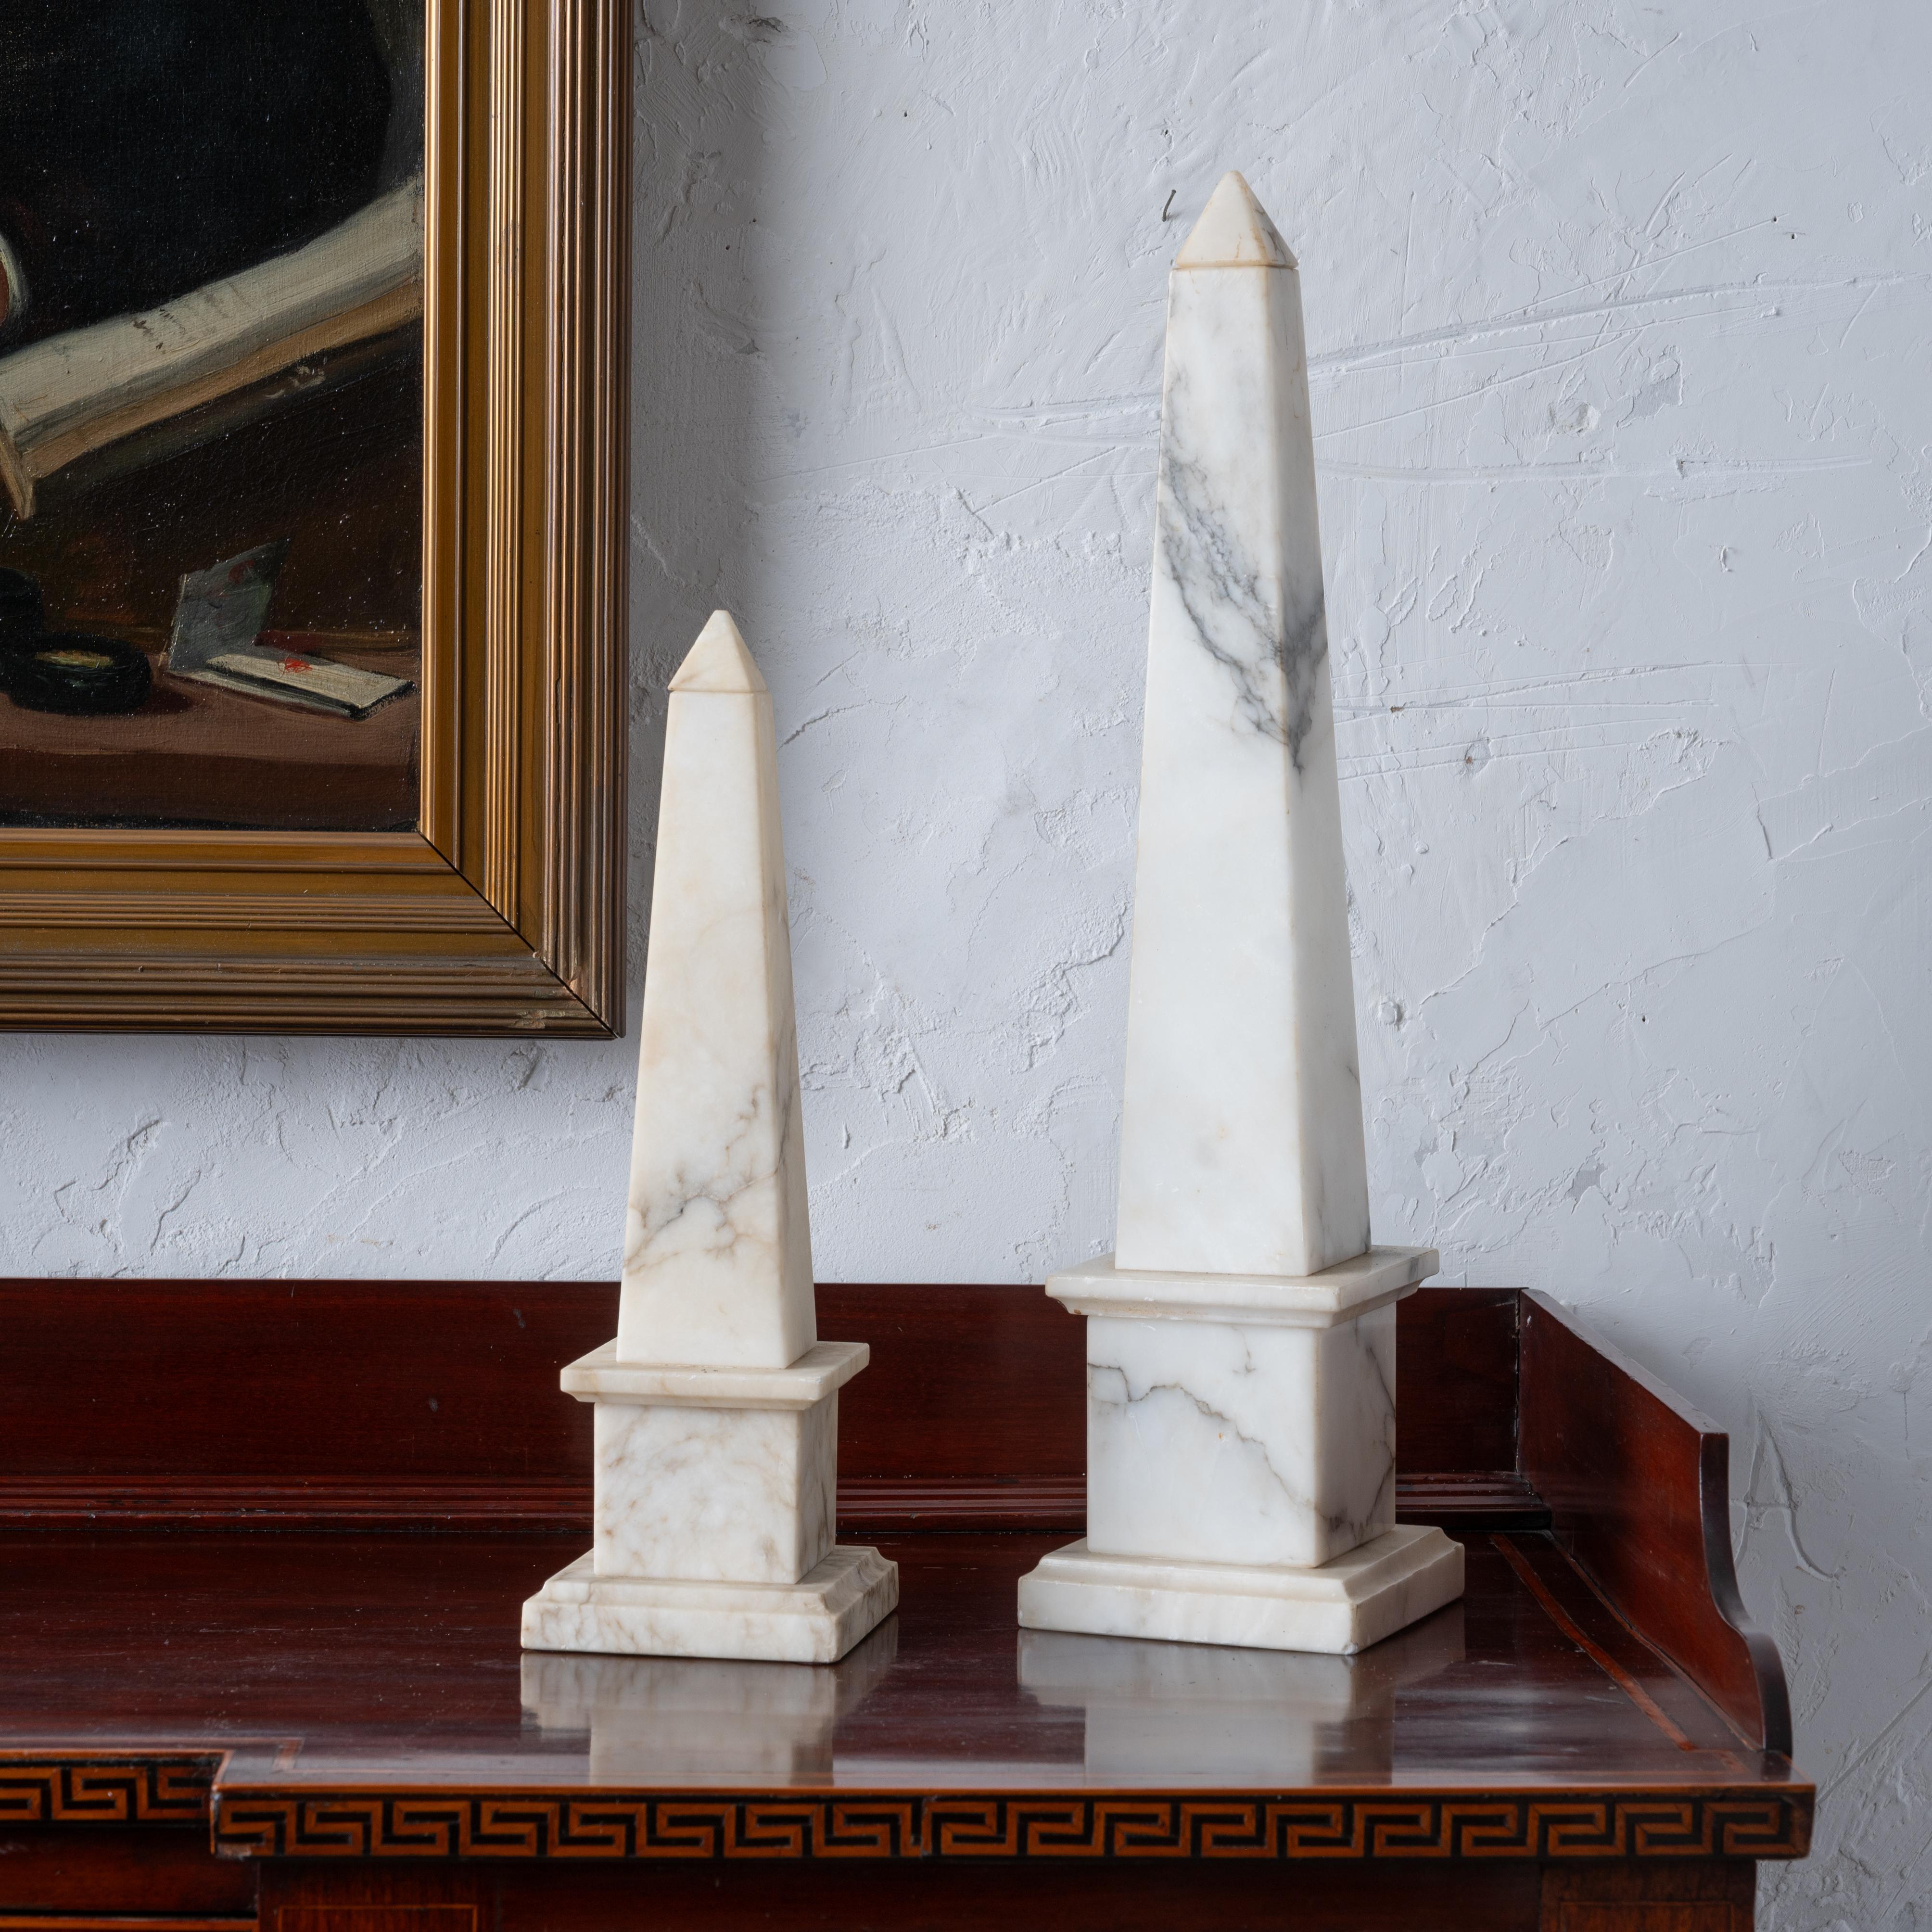 A pair of Italian alabaster obelisks, mid 20th century. With removable caps and drilled for lamp conversion.

larger: 5 inches wide by 20 inches tall 
smaller: 4 ¼ inches wide by 14 inches tall